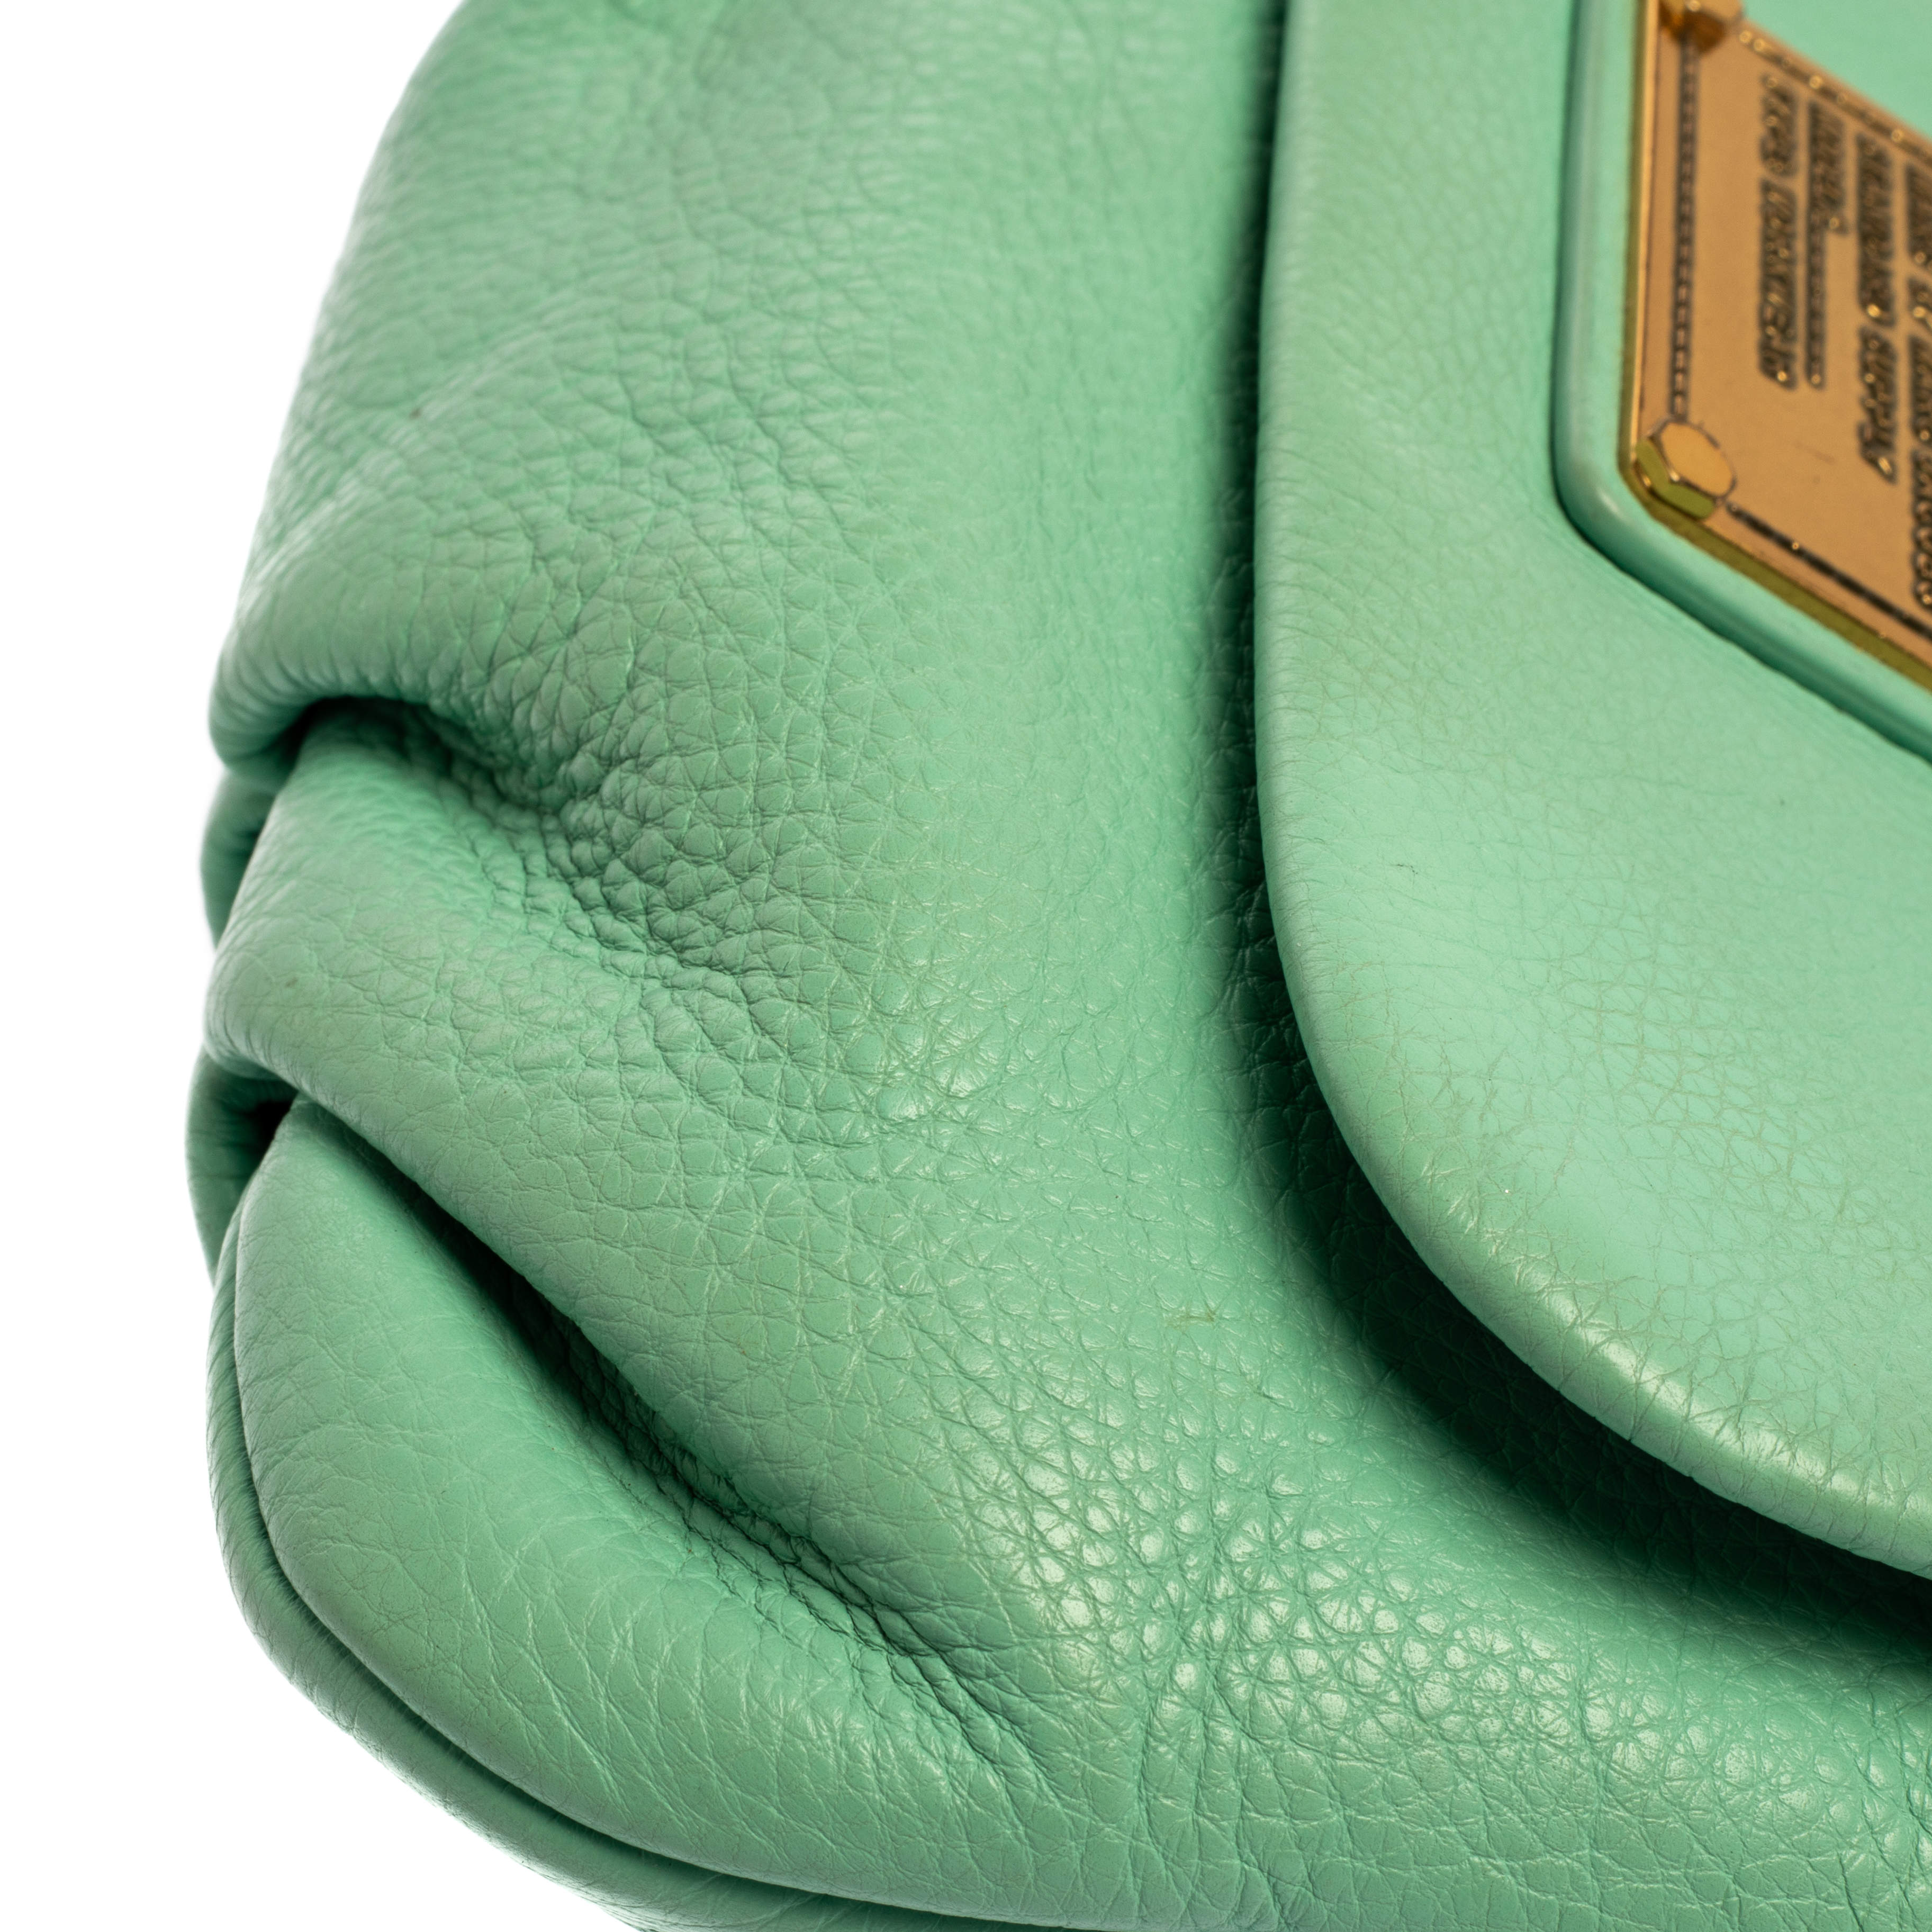 MARC JACOBS Duo Mint Green Colored Bucket & Crossbody AUTHENTIC NWT